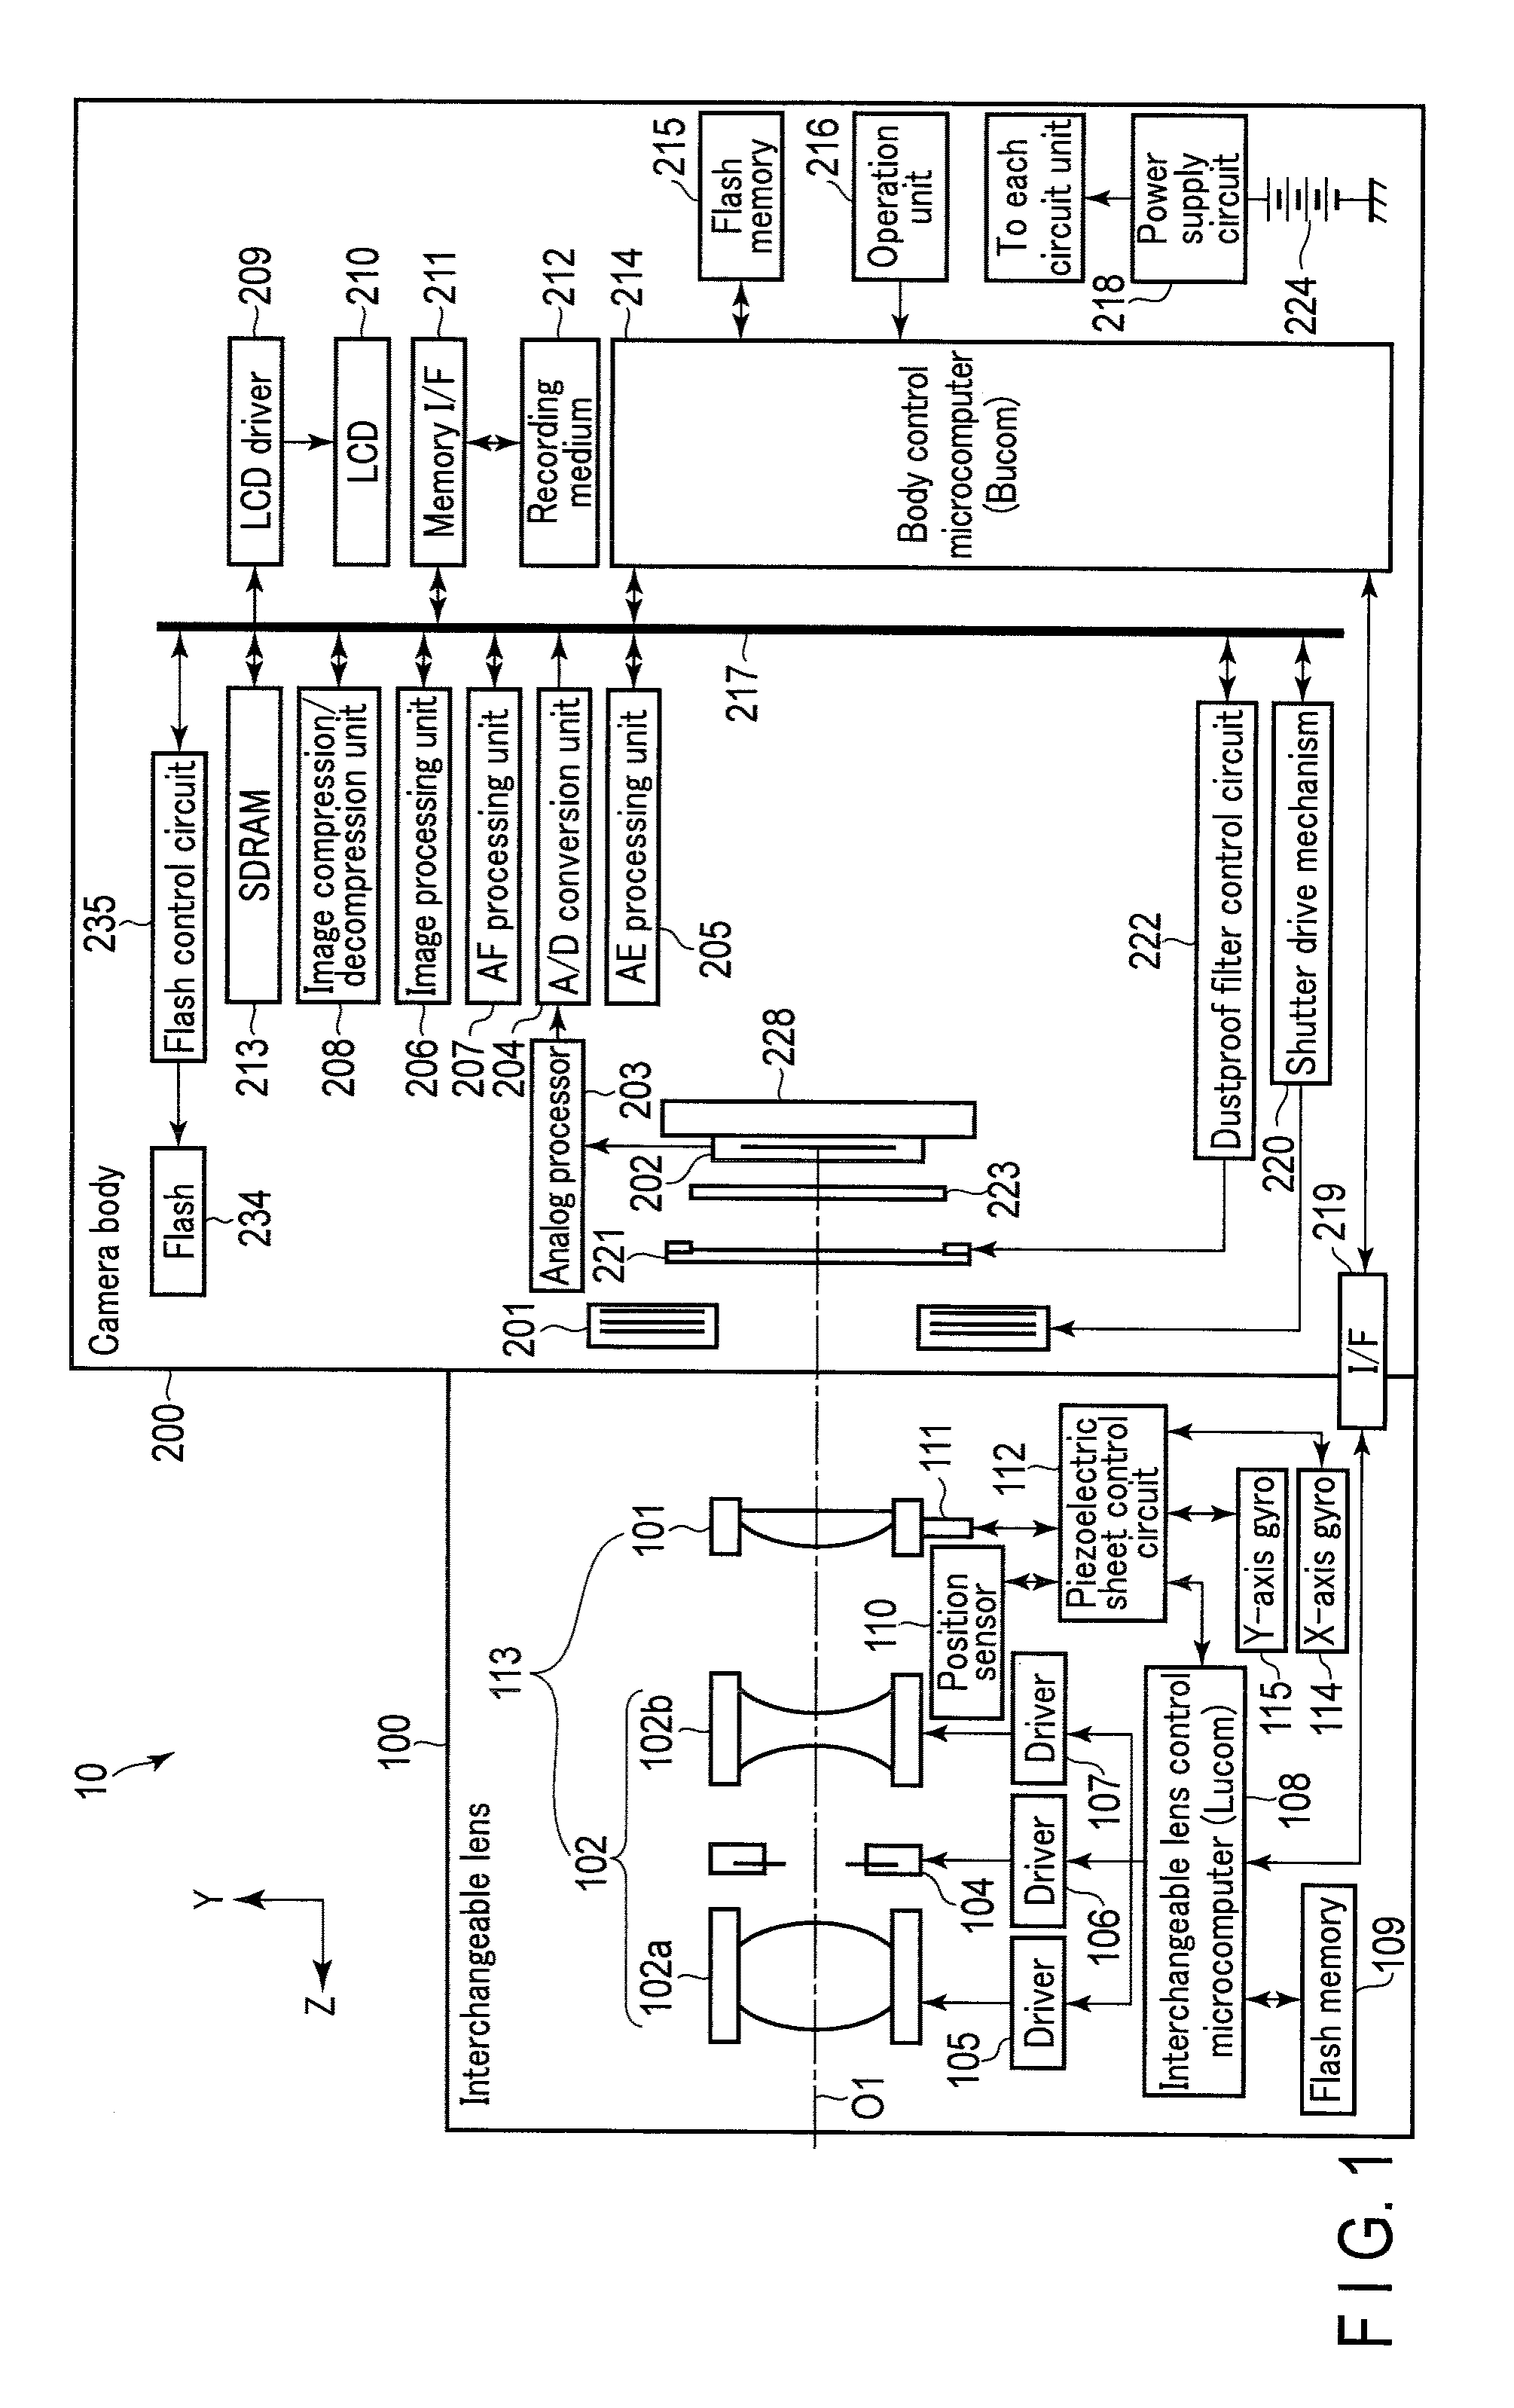 Driver and image instrument